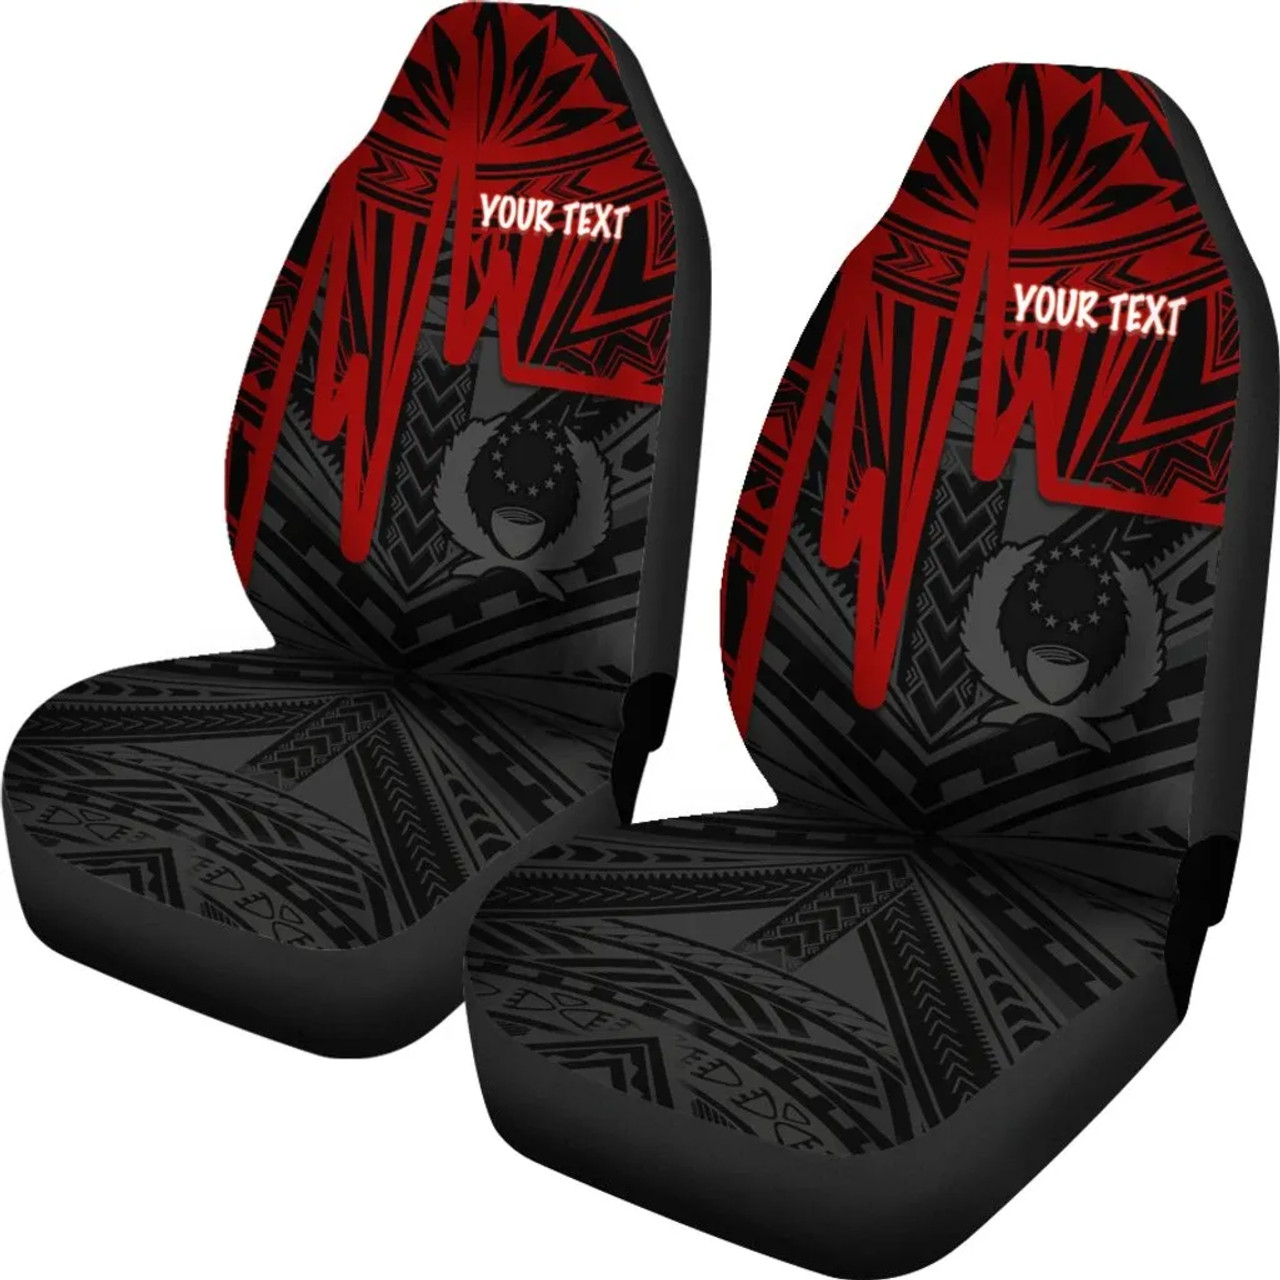 Pohnpei Personalised Car Seat Covers - Pohnpei Seal In Heartbeat Patterns Style (Red)